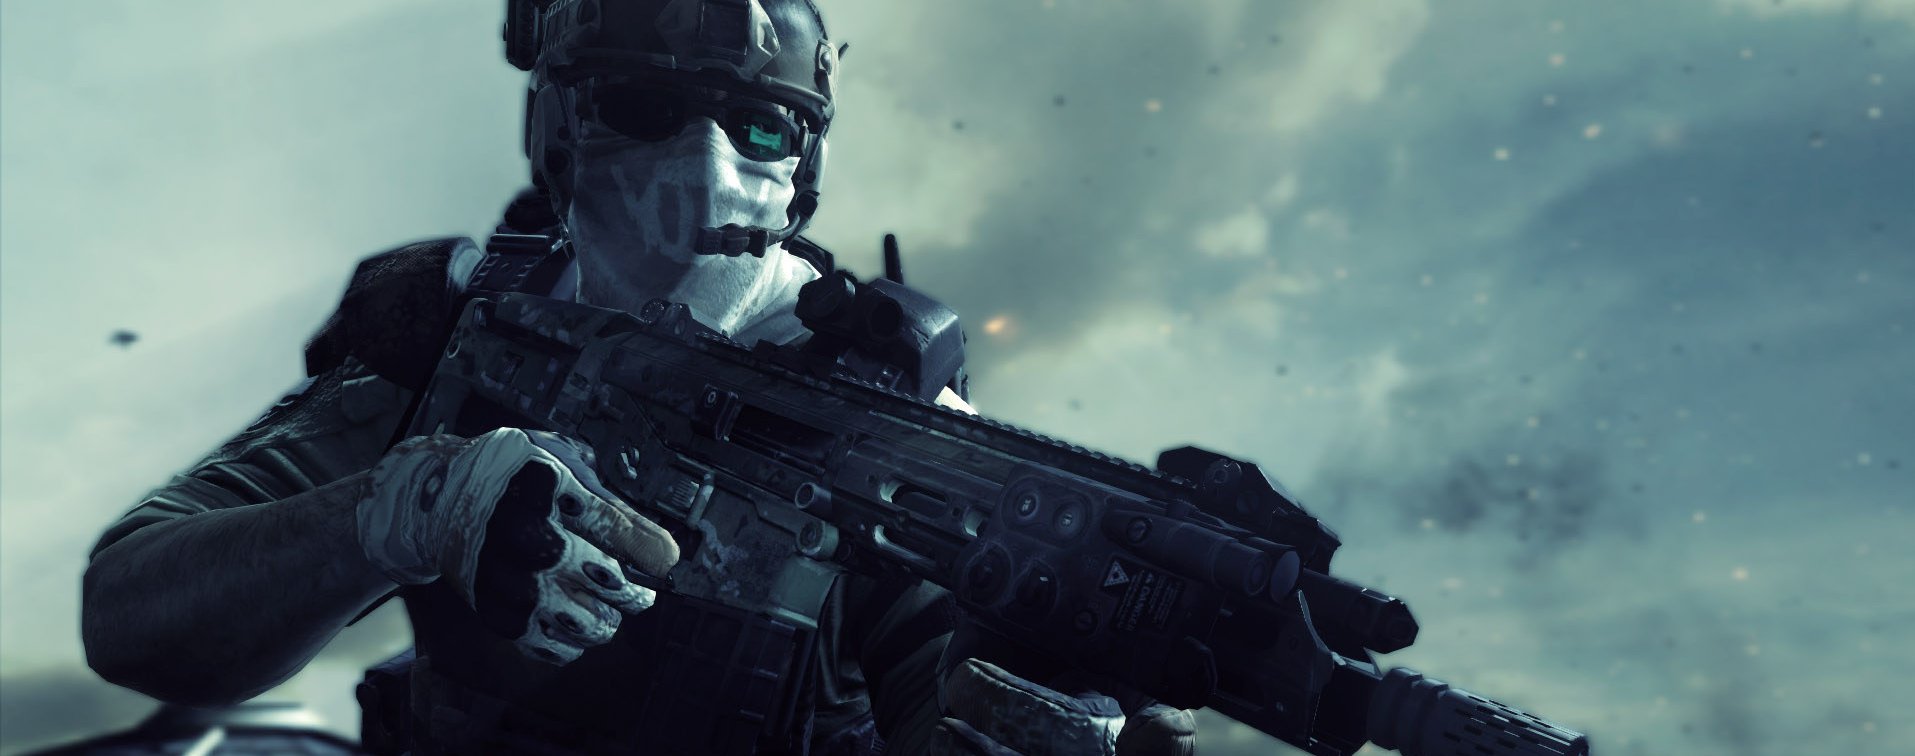 Ghost recon wallpapers games Background HD Wallpaper for Desktop